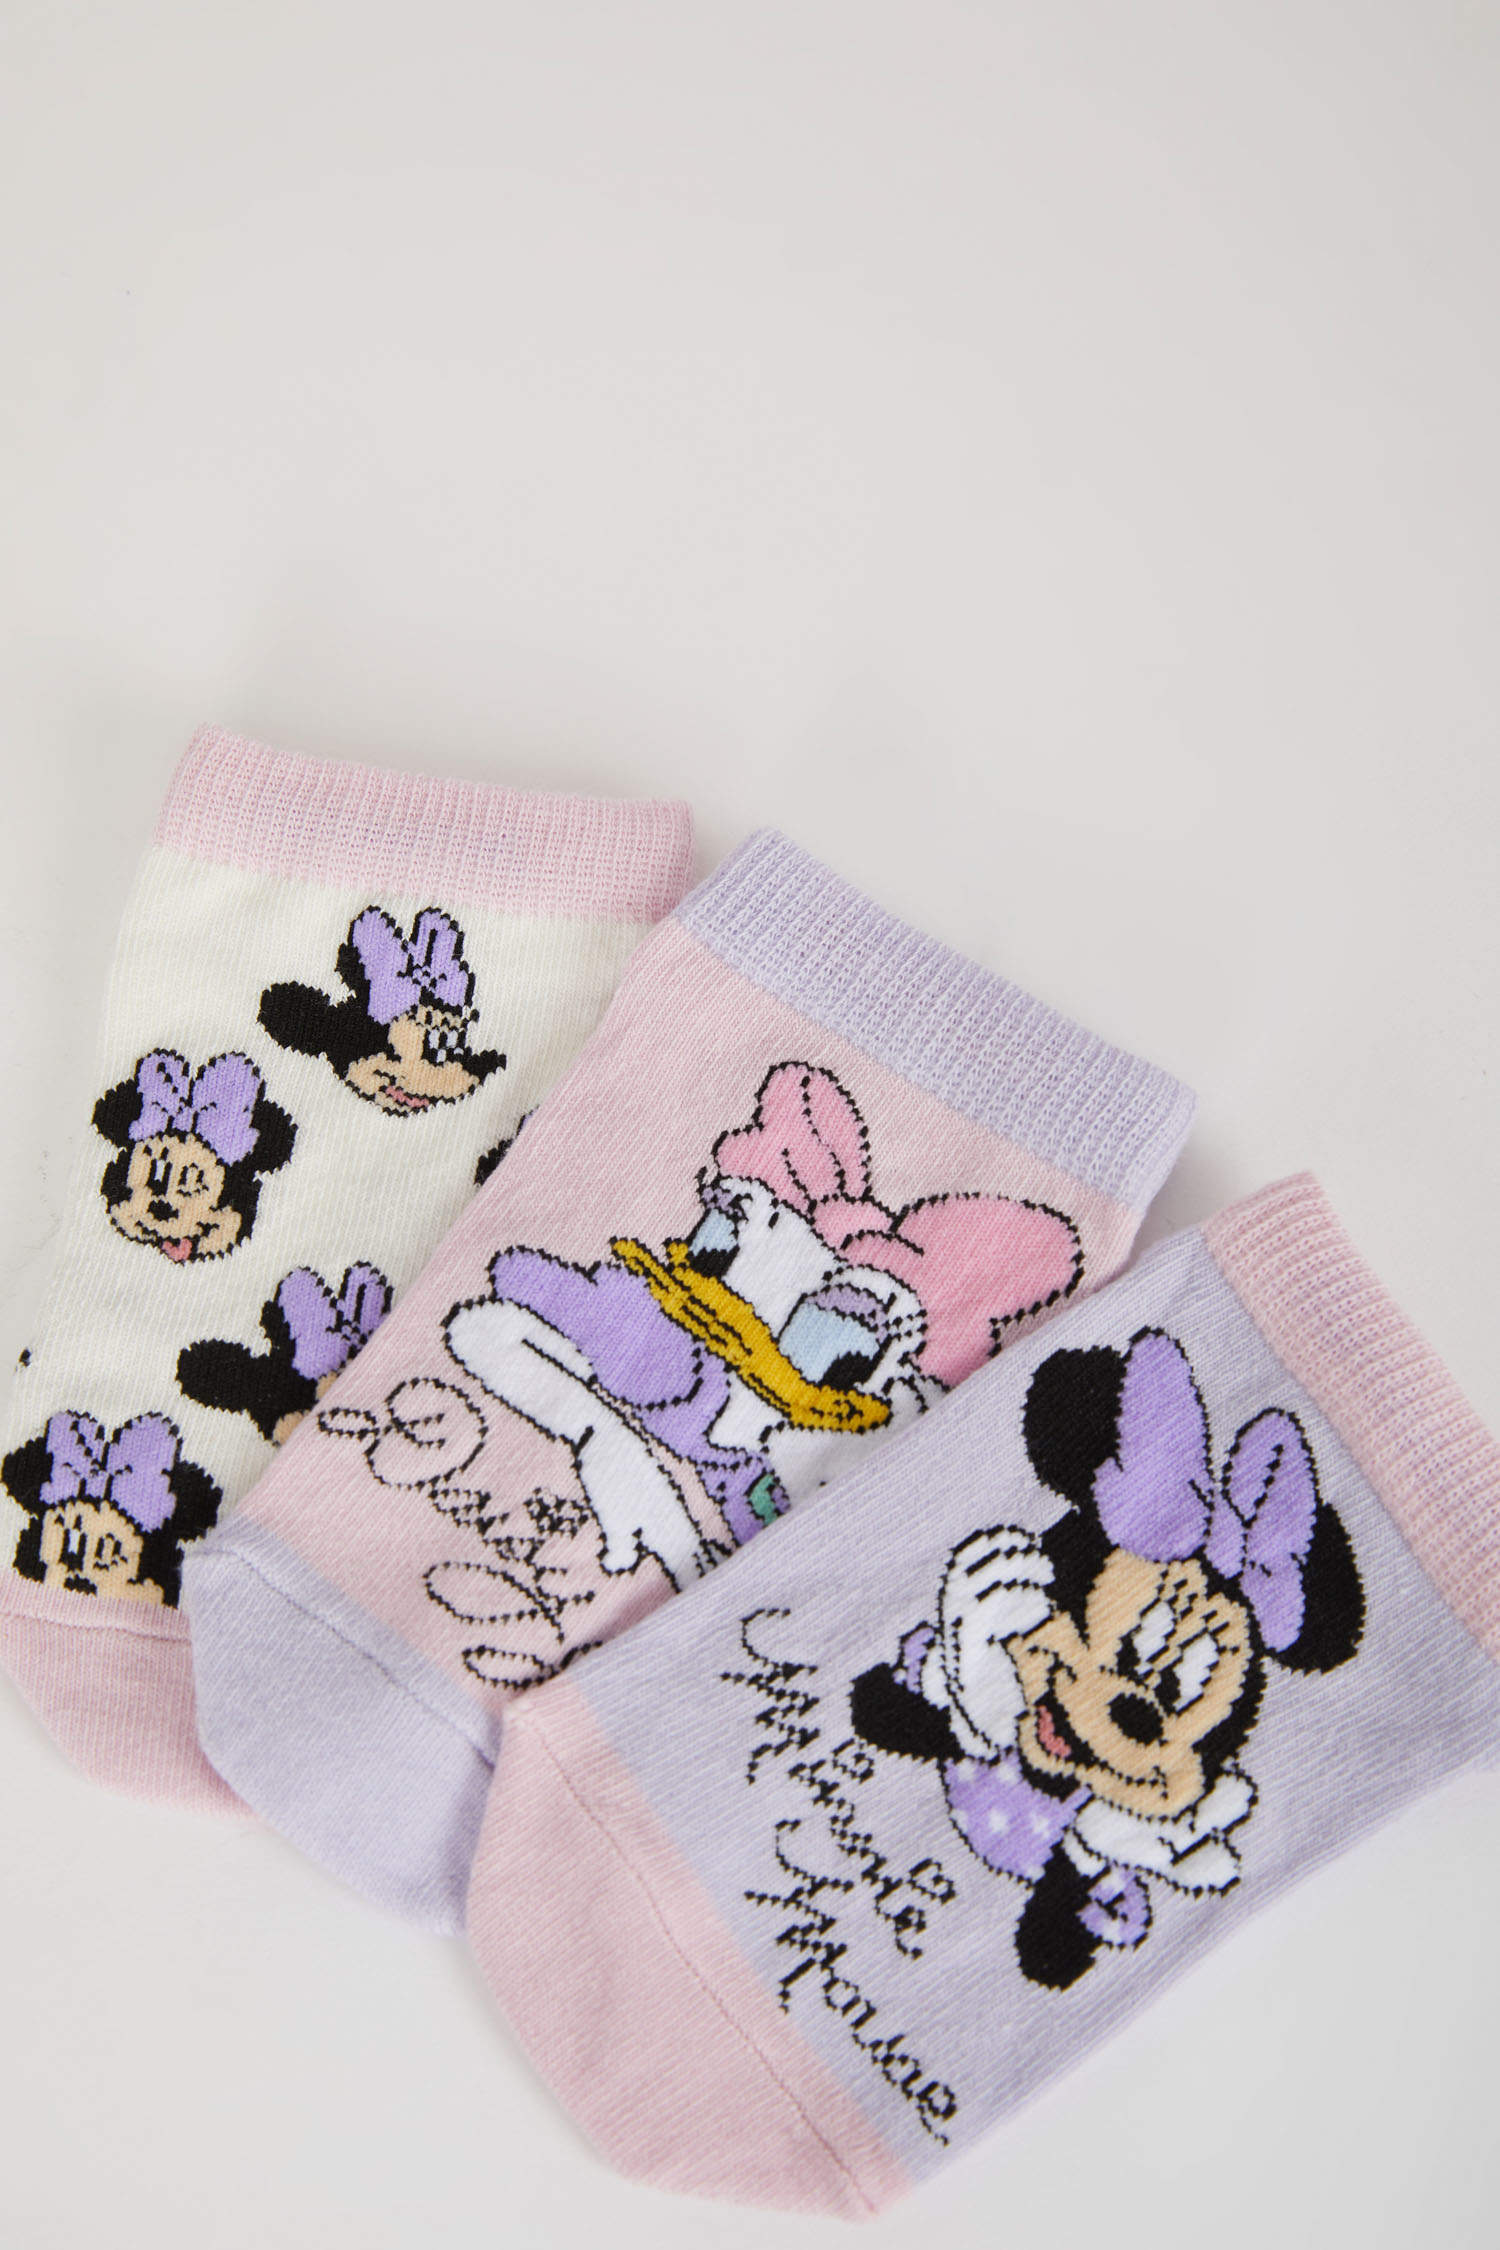 Disney Minnie girl briefs 3-piece pack: for sale at 5.99€ on